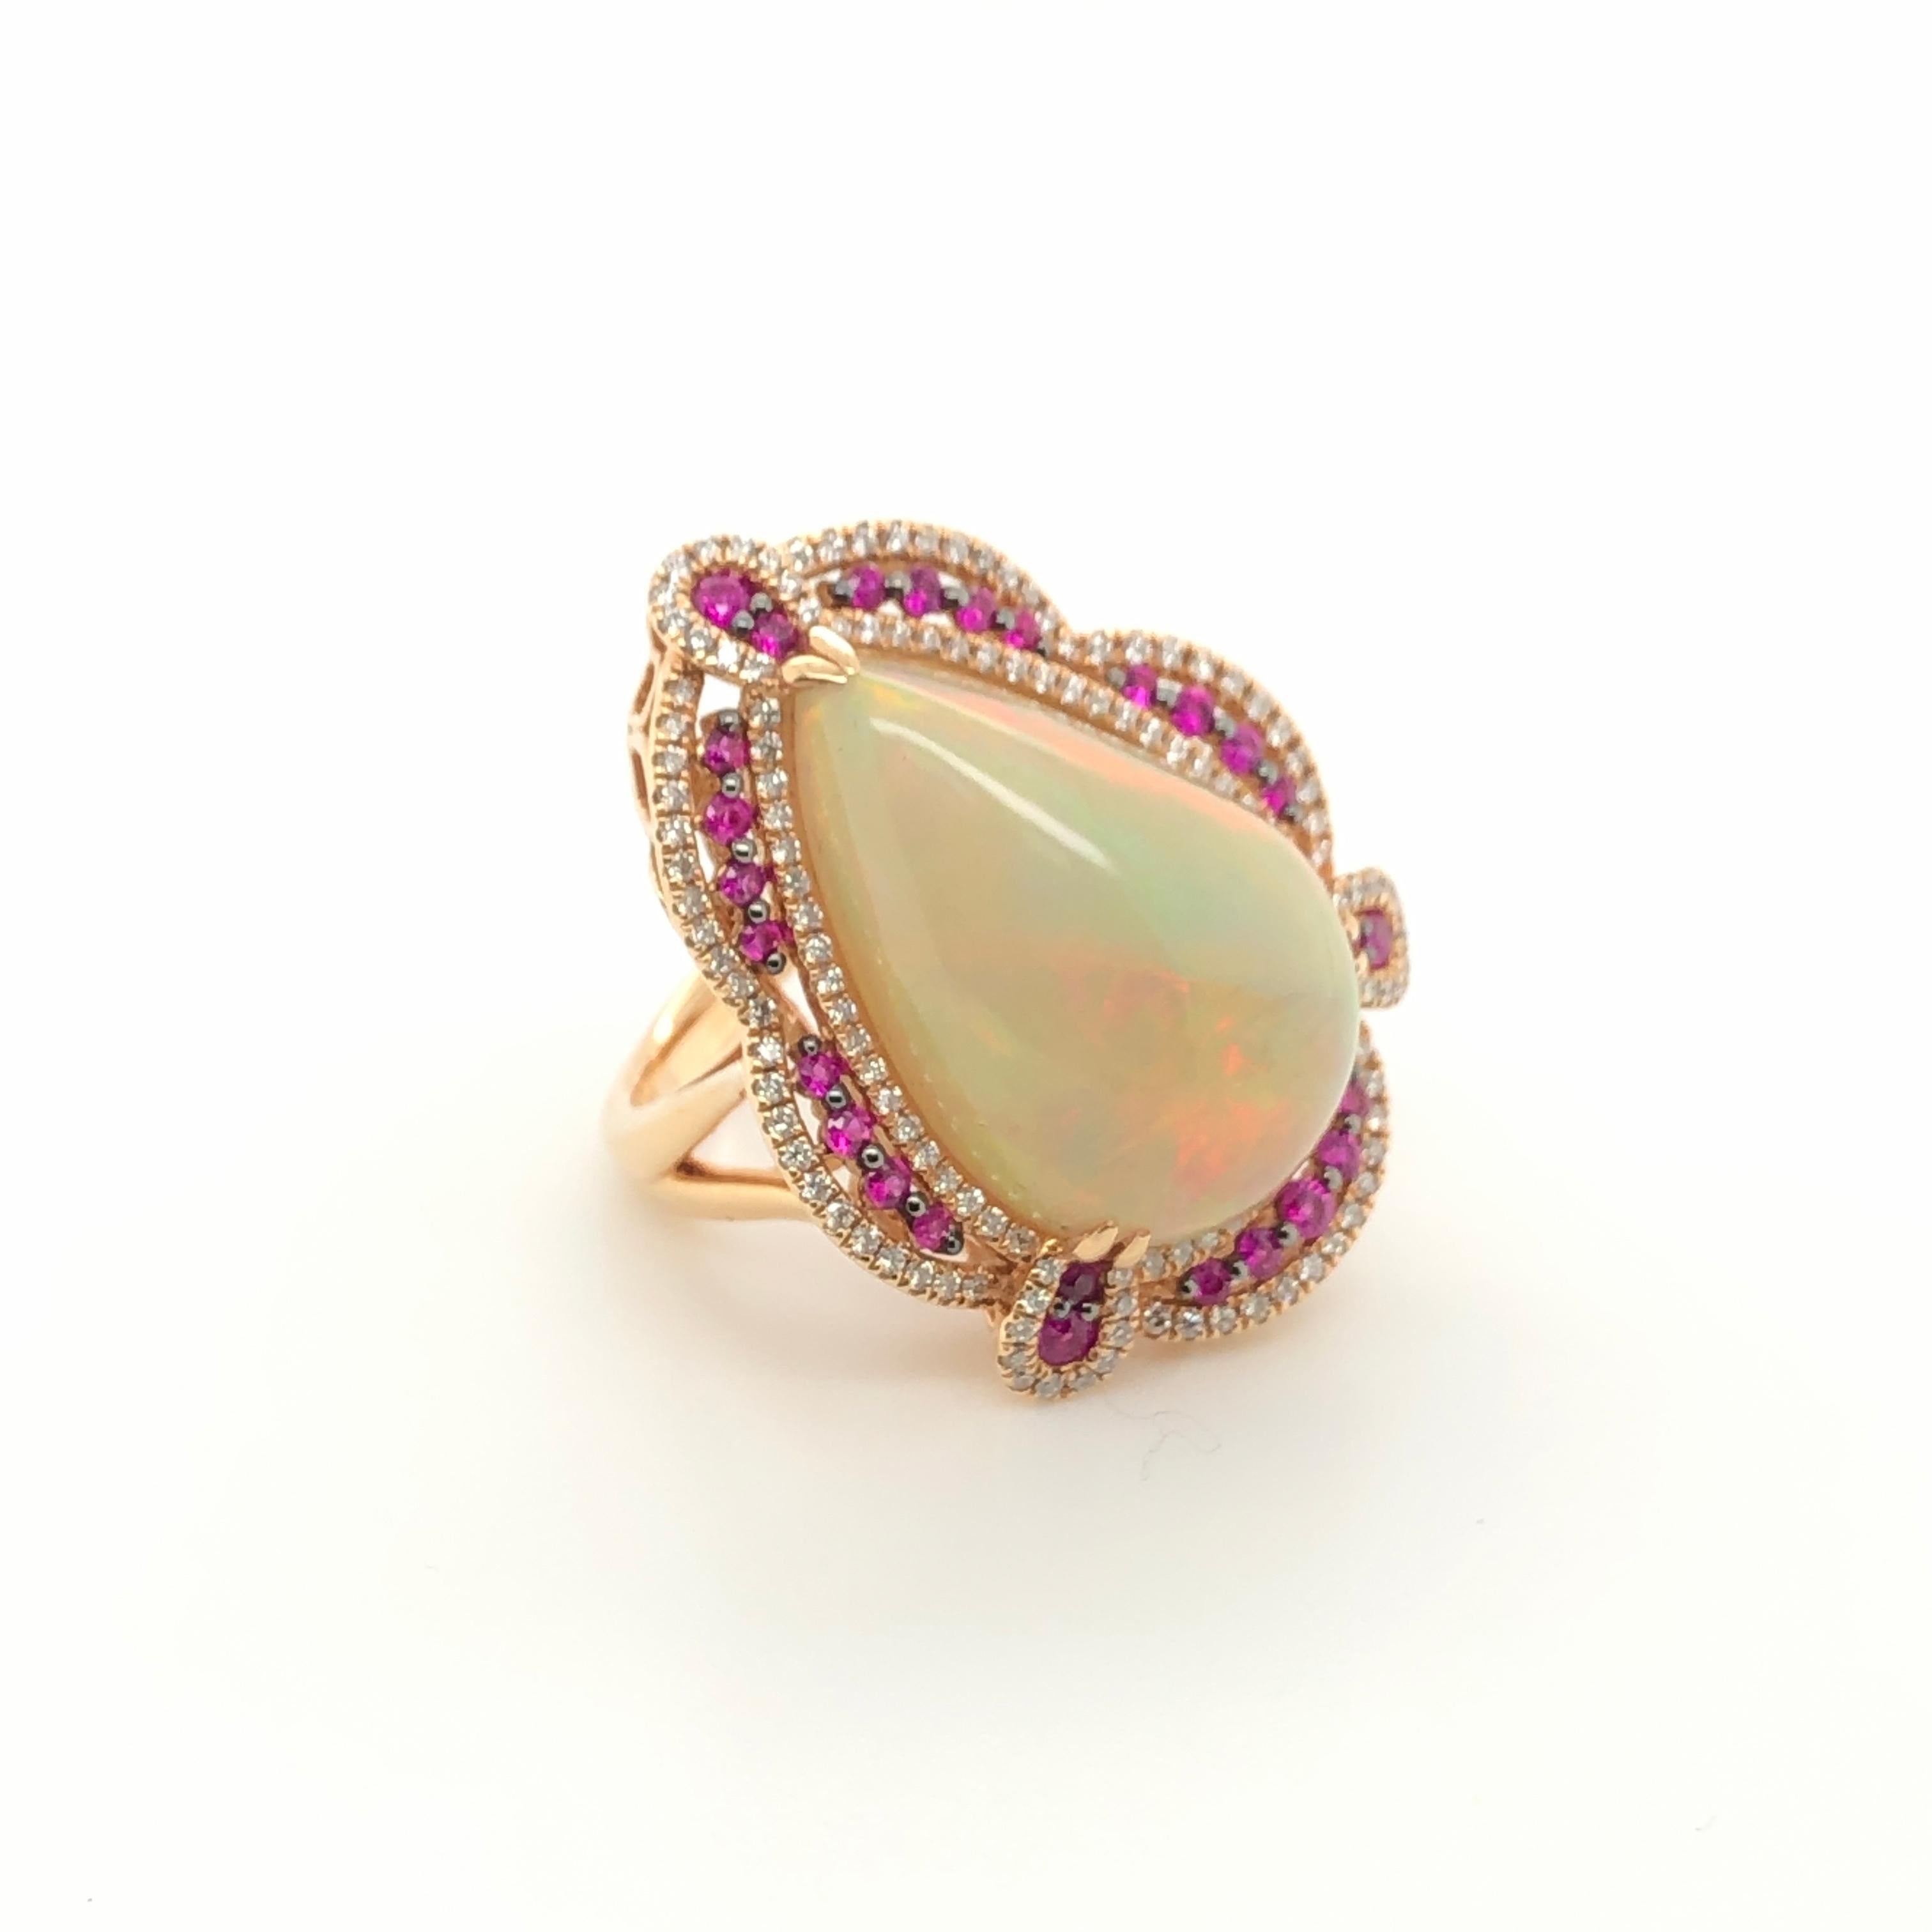 A gorgeous 13-1/4 carat pear-shaped Neopolitan Opal shimmers from within a contrasting border of Passion Rubies (1/2 ct. t.w.) and sparking Vanilla Diamonds (5/8 ct. t.w.) in this 18K Strawberry Gold ring from Le Vian Couture. A  single Chocolate